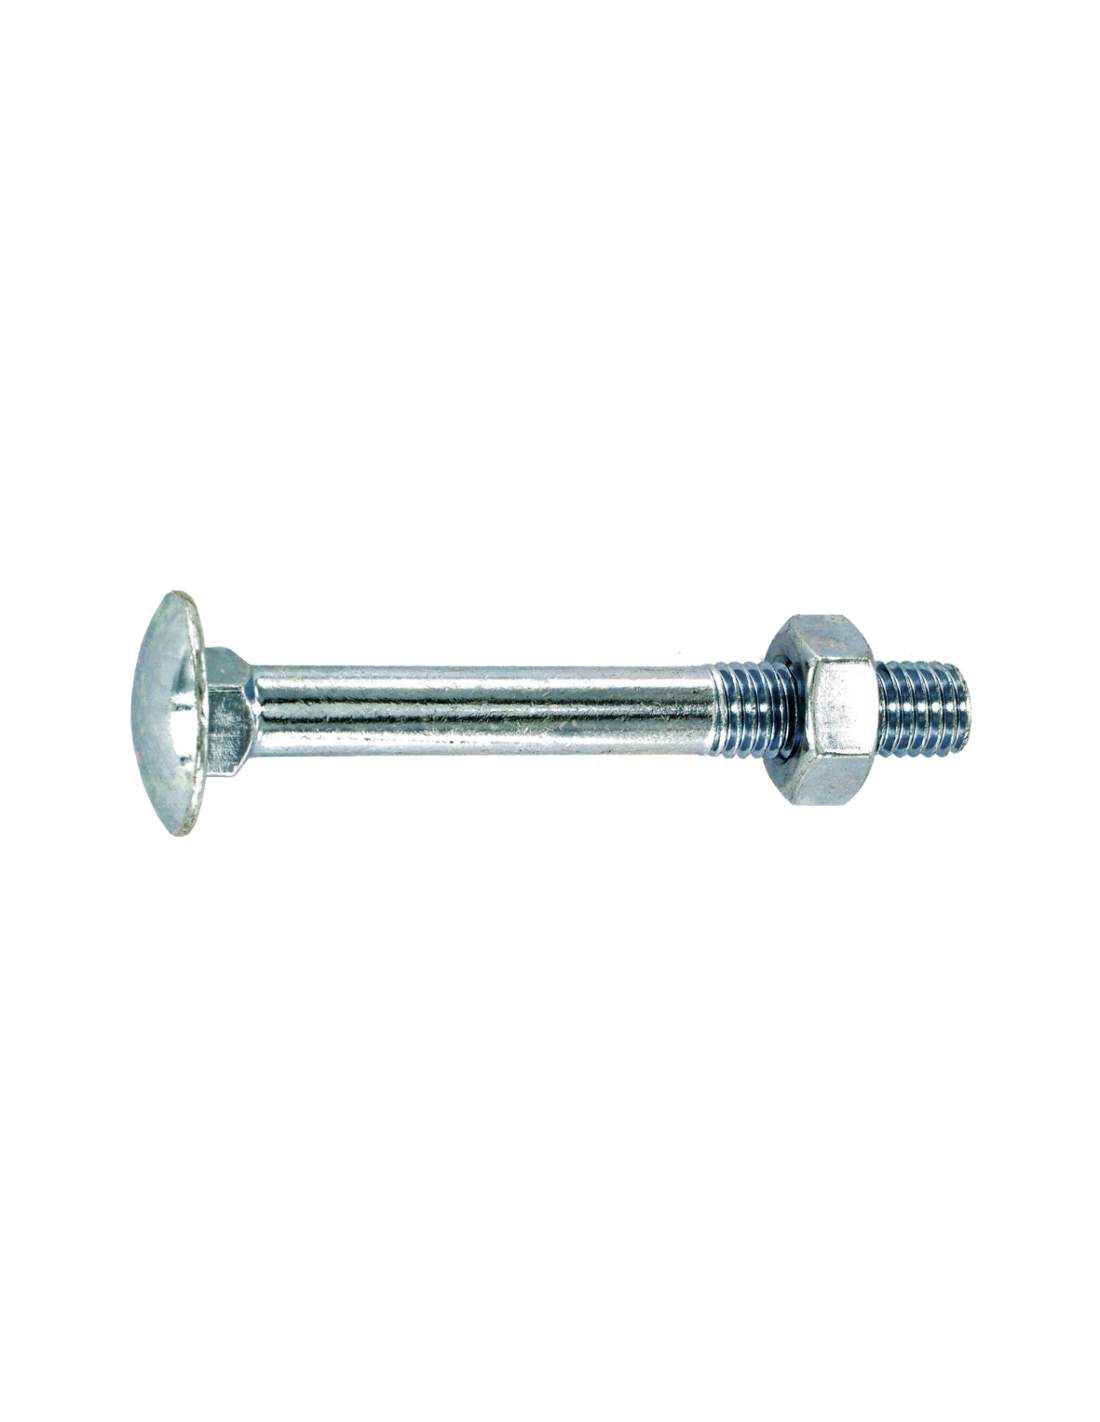 Zinc-plated steel round-head bolt with square collar 7x70mm, 4 pcs.